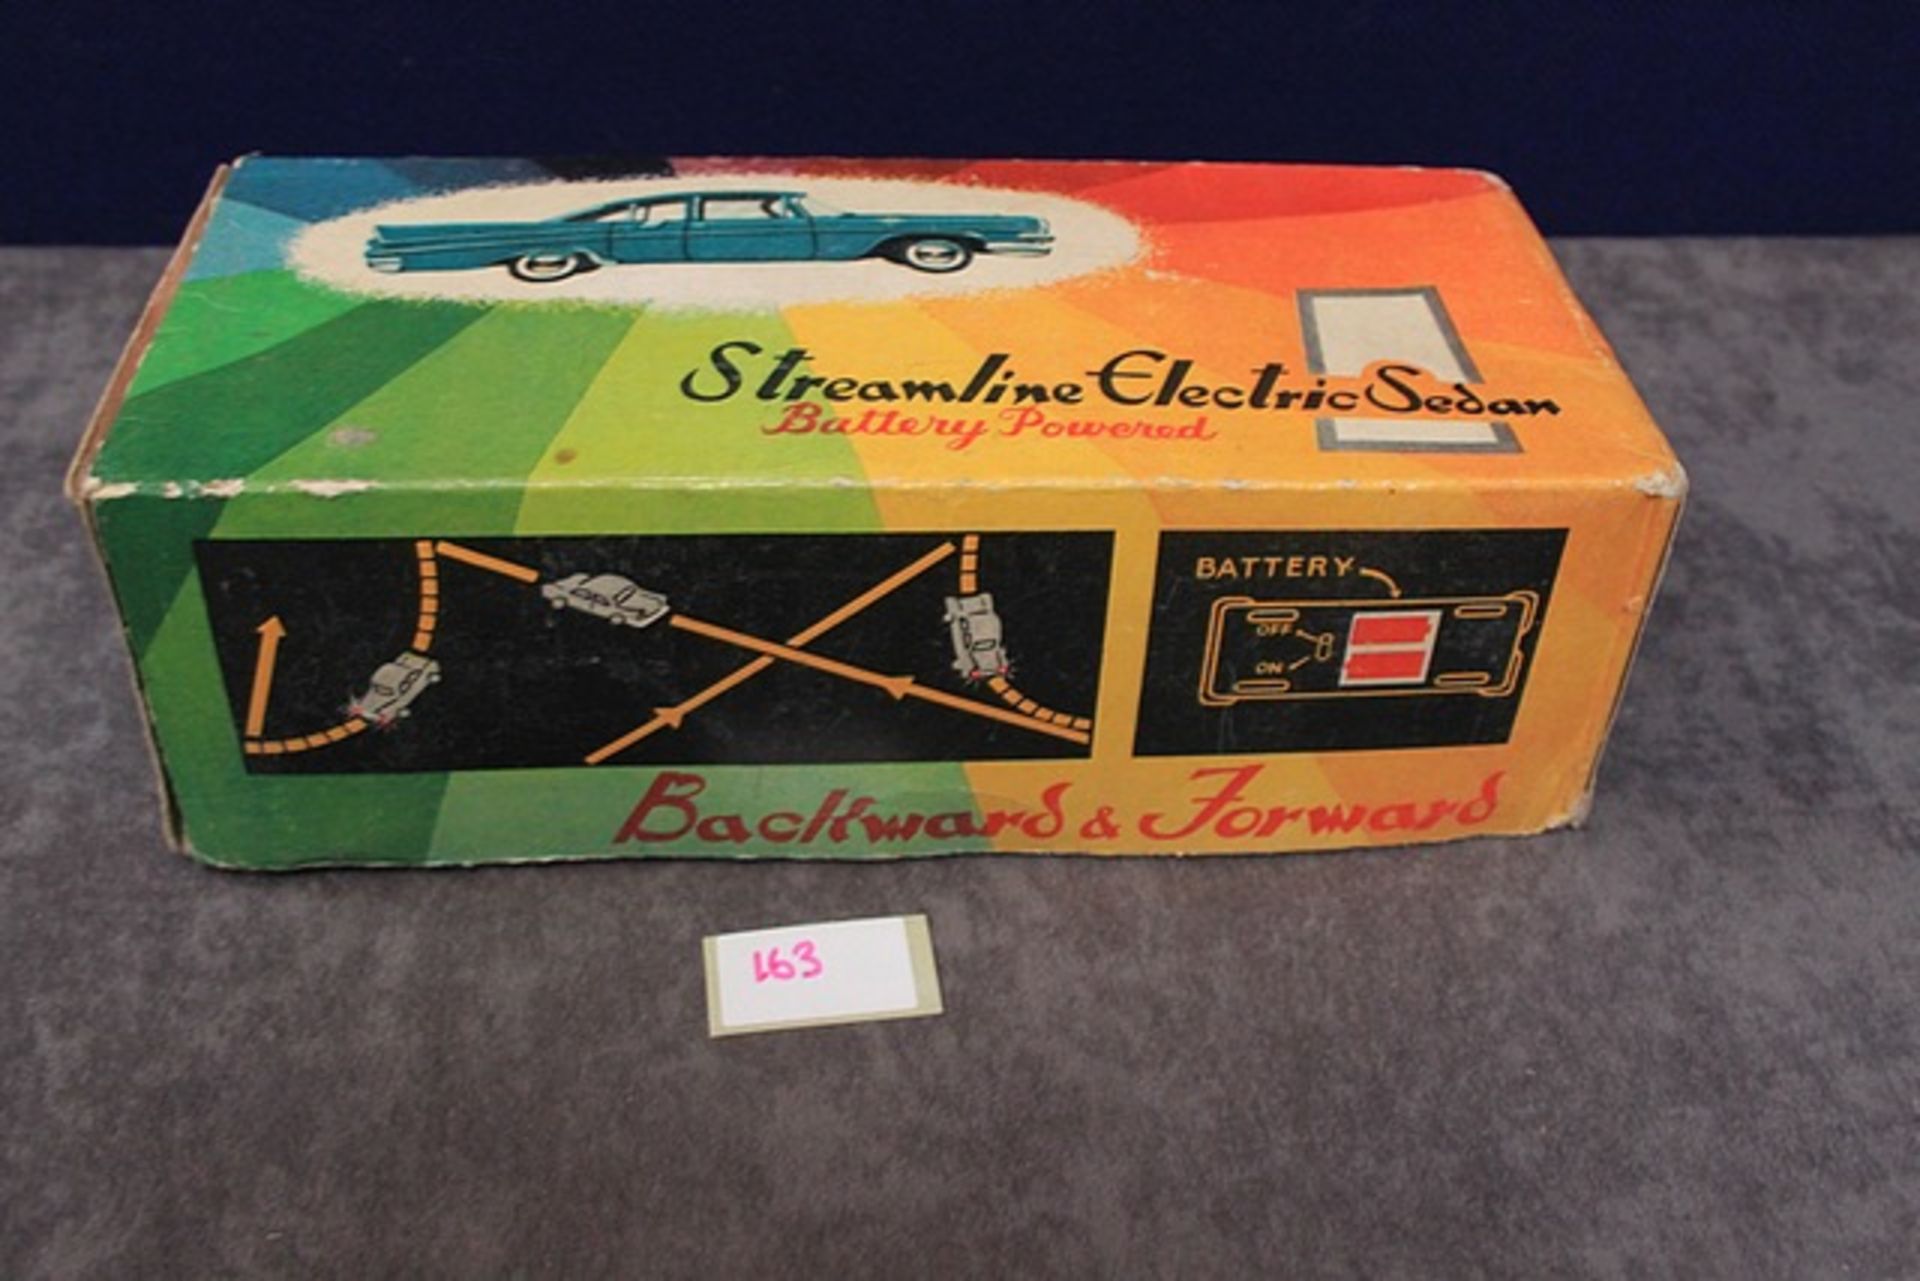 Rare And VIntage Chinese Tinplate Car, Streamline Electric Sedan, - Art No. ME009 Battery Operated - Image 2 of 3